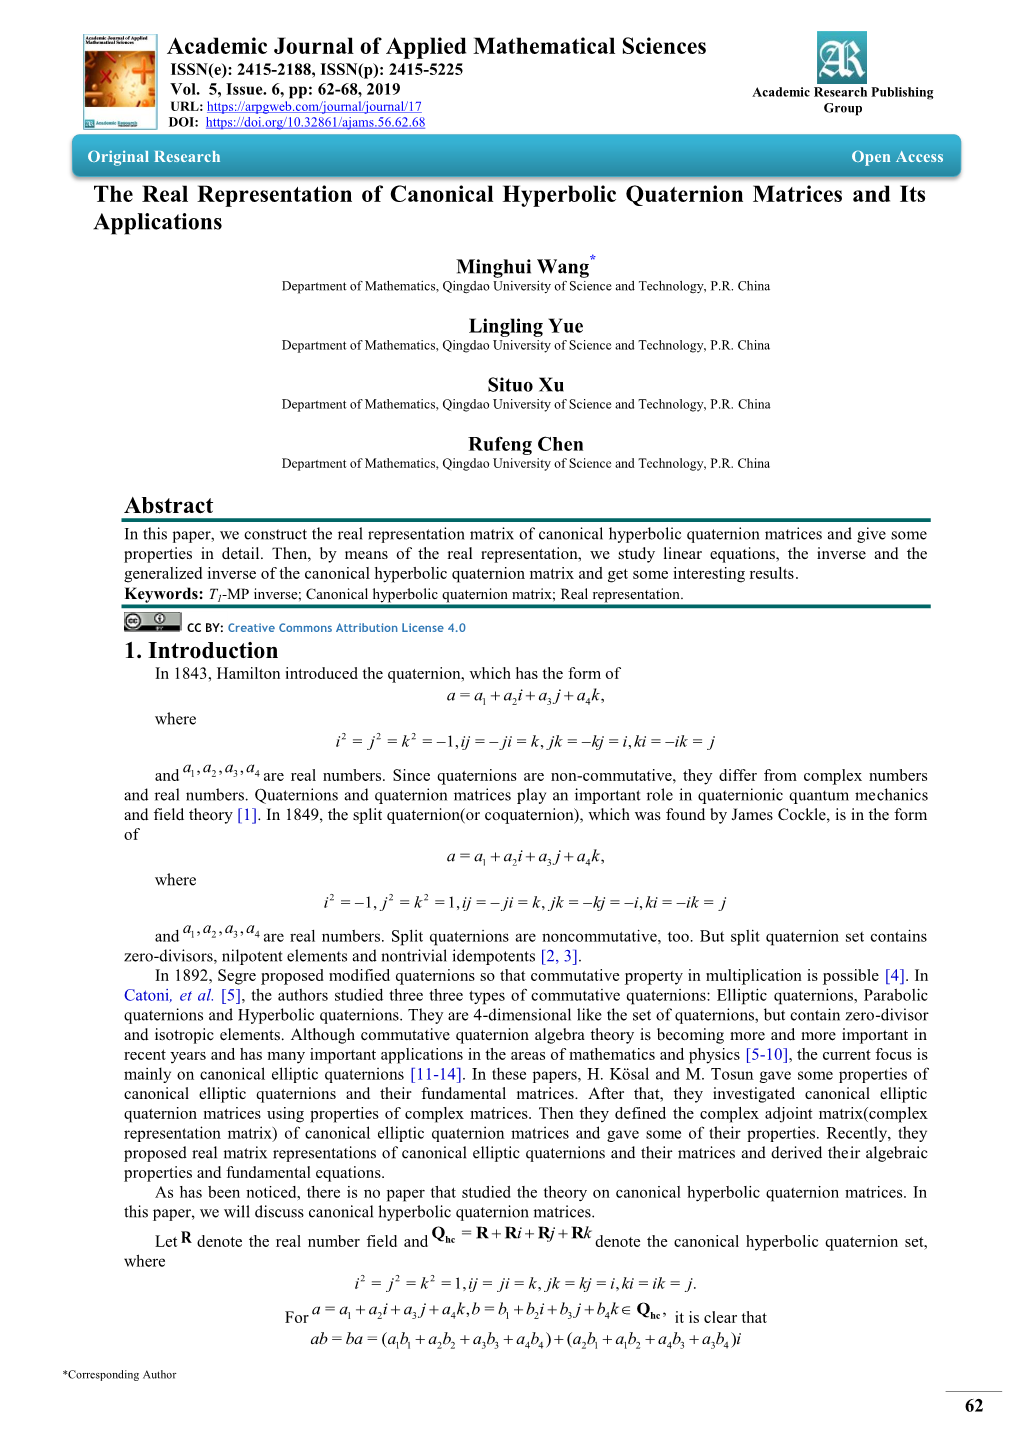 Academic Journal of Applied Mathematical Sciences the Real